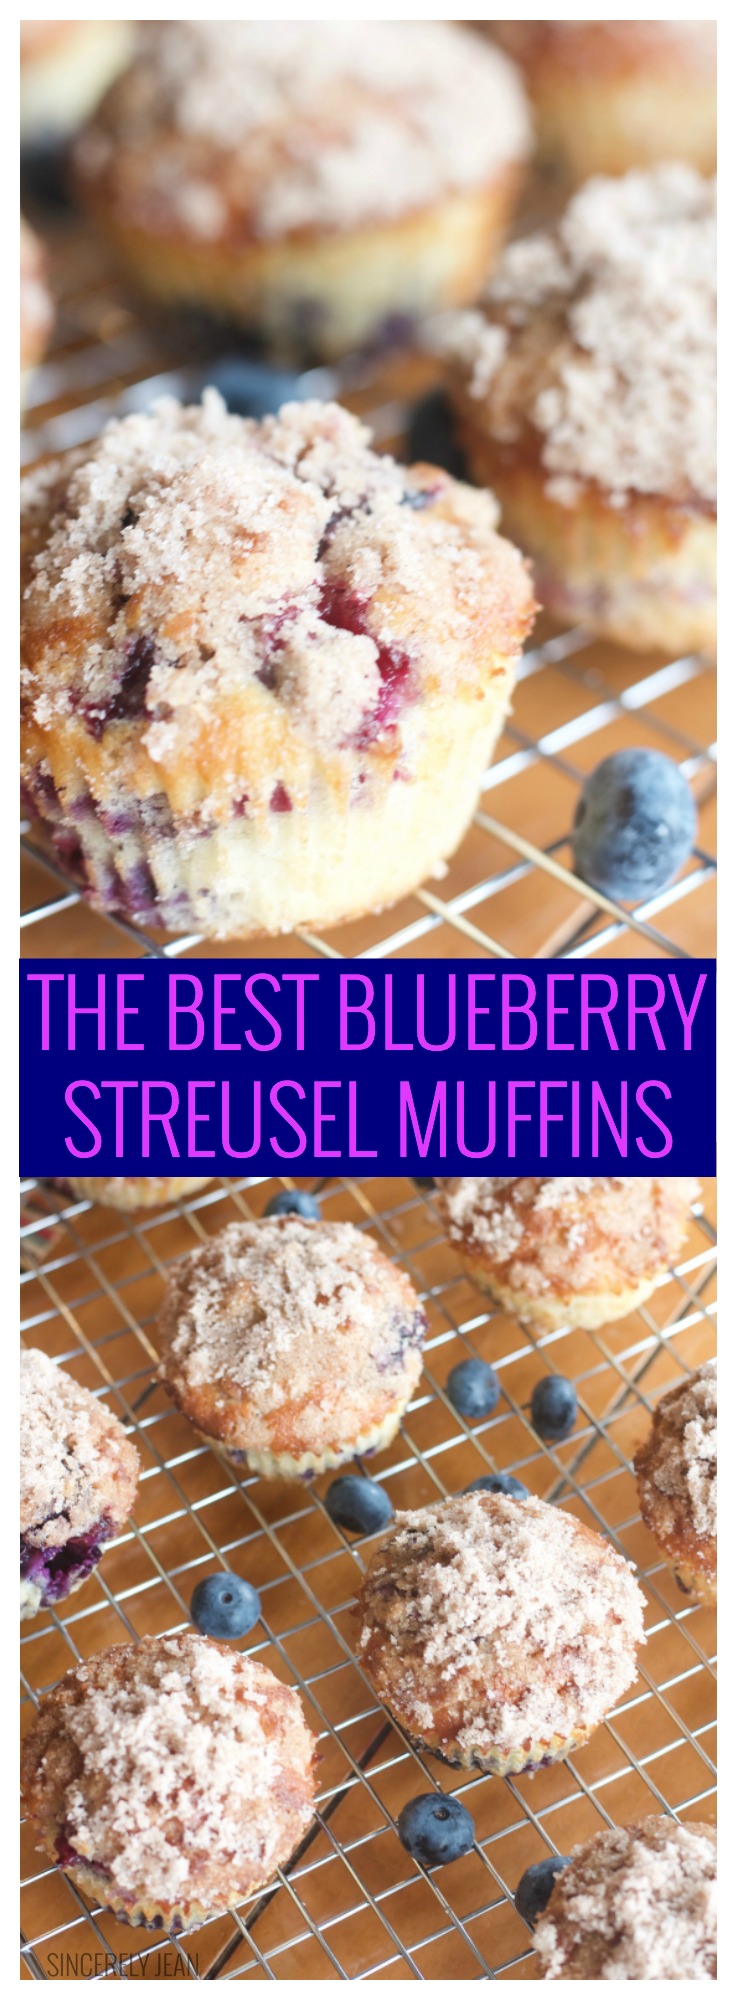 The Best Blueberry Streusel Muffins - Sincerely Jean